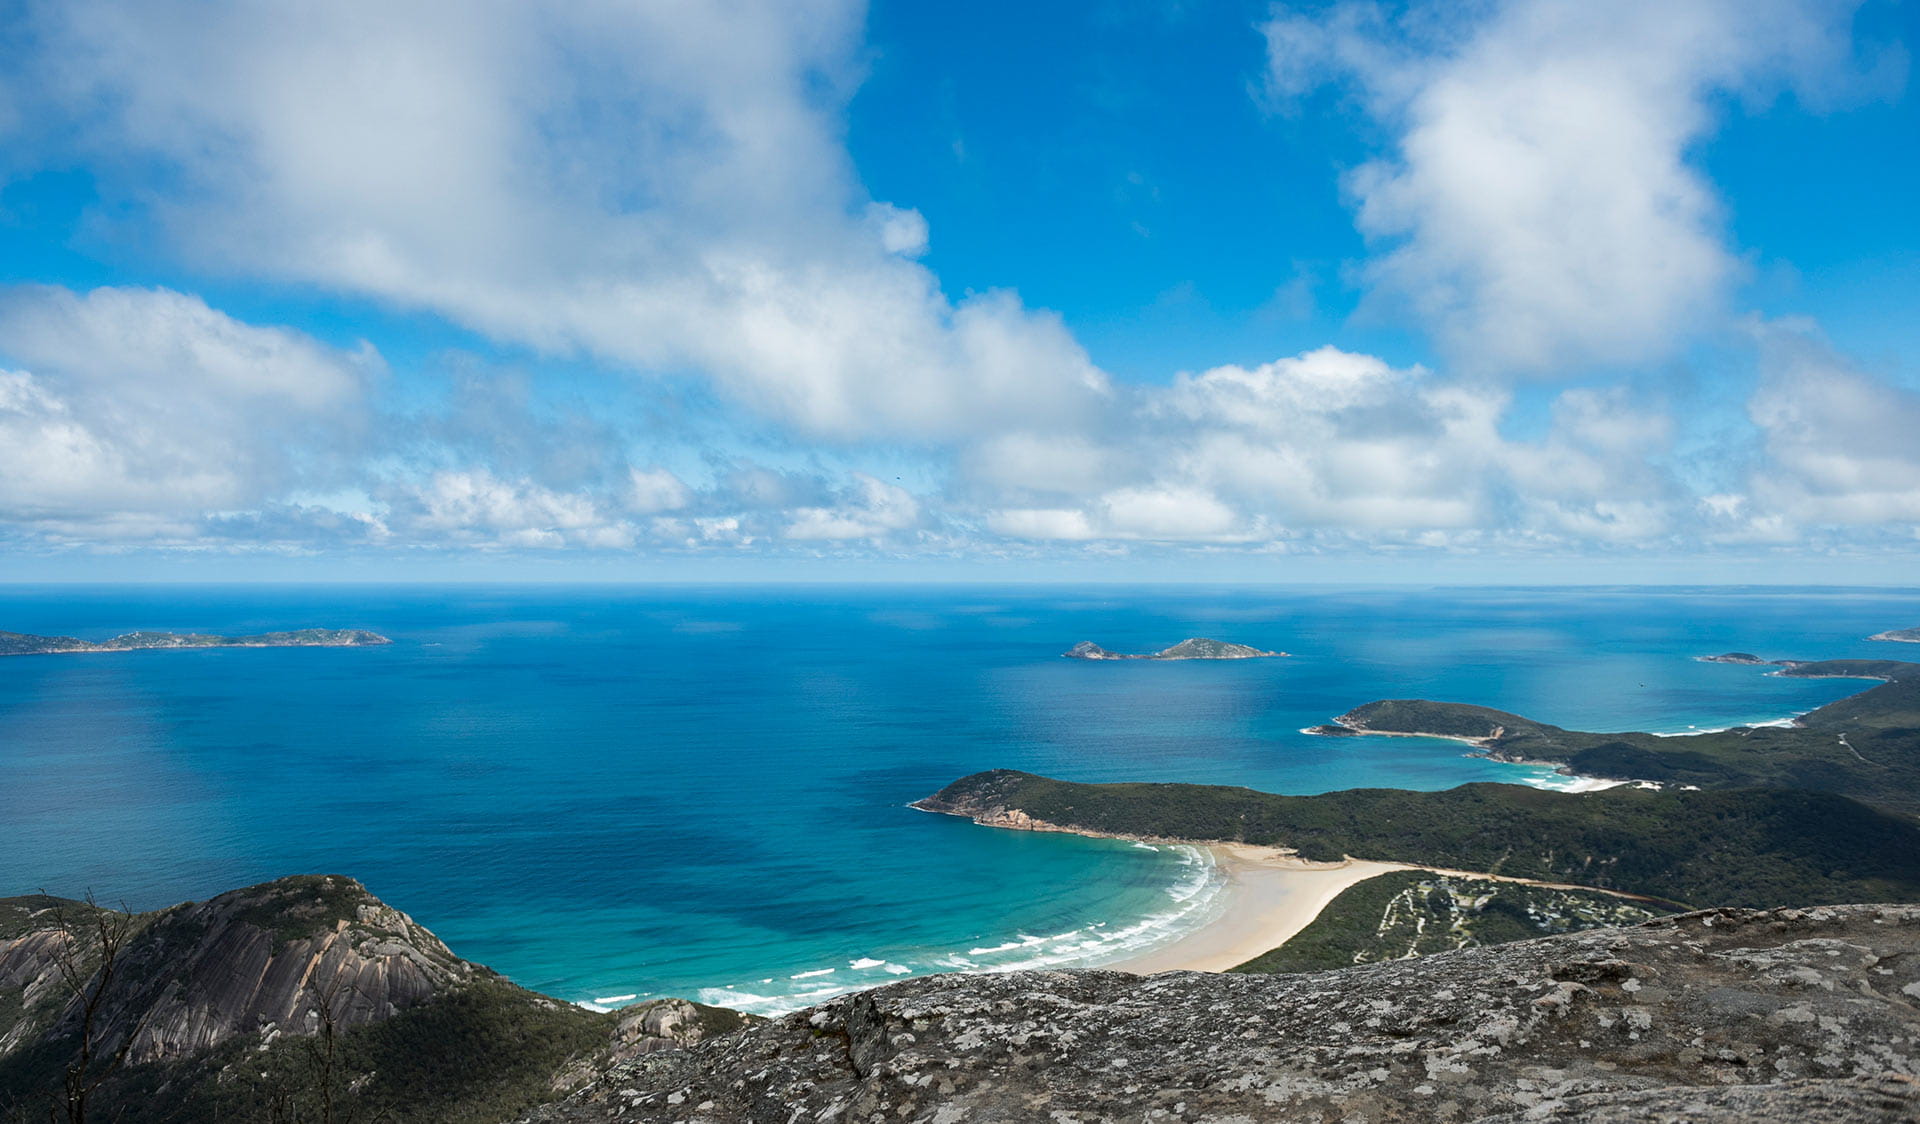 The view of Norman Beach from the summit of Mount Oberon.